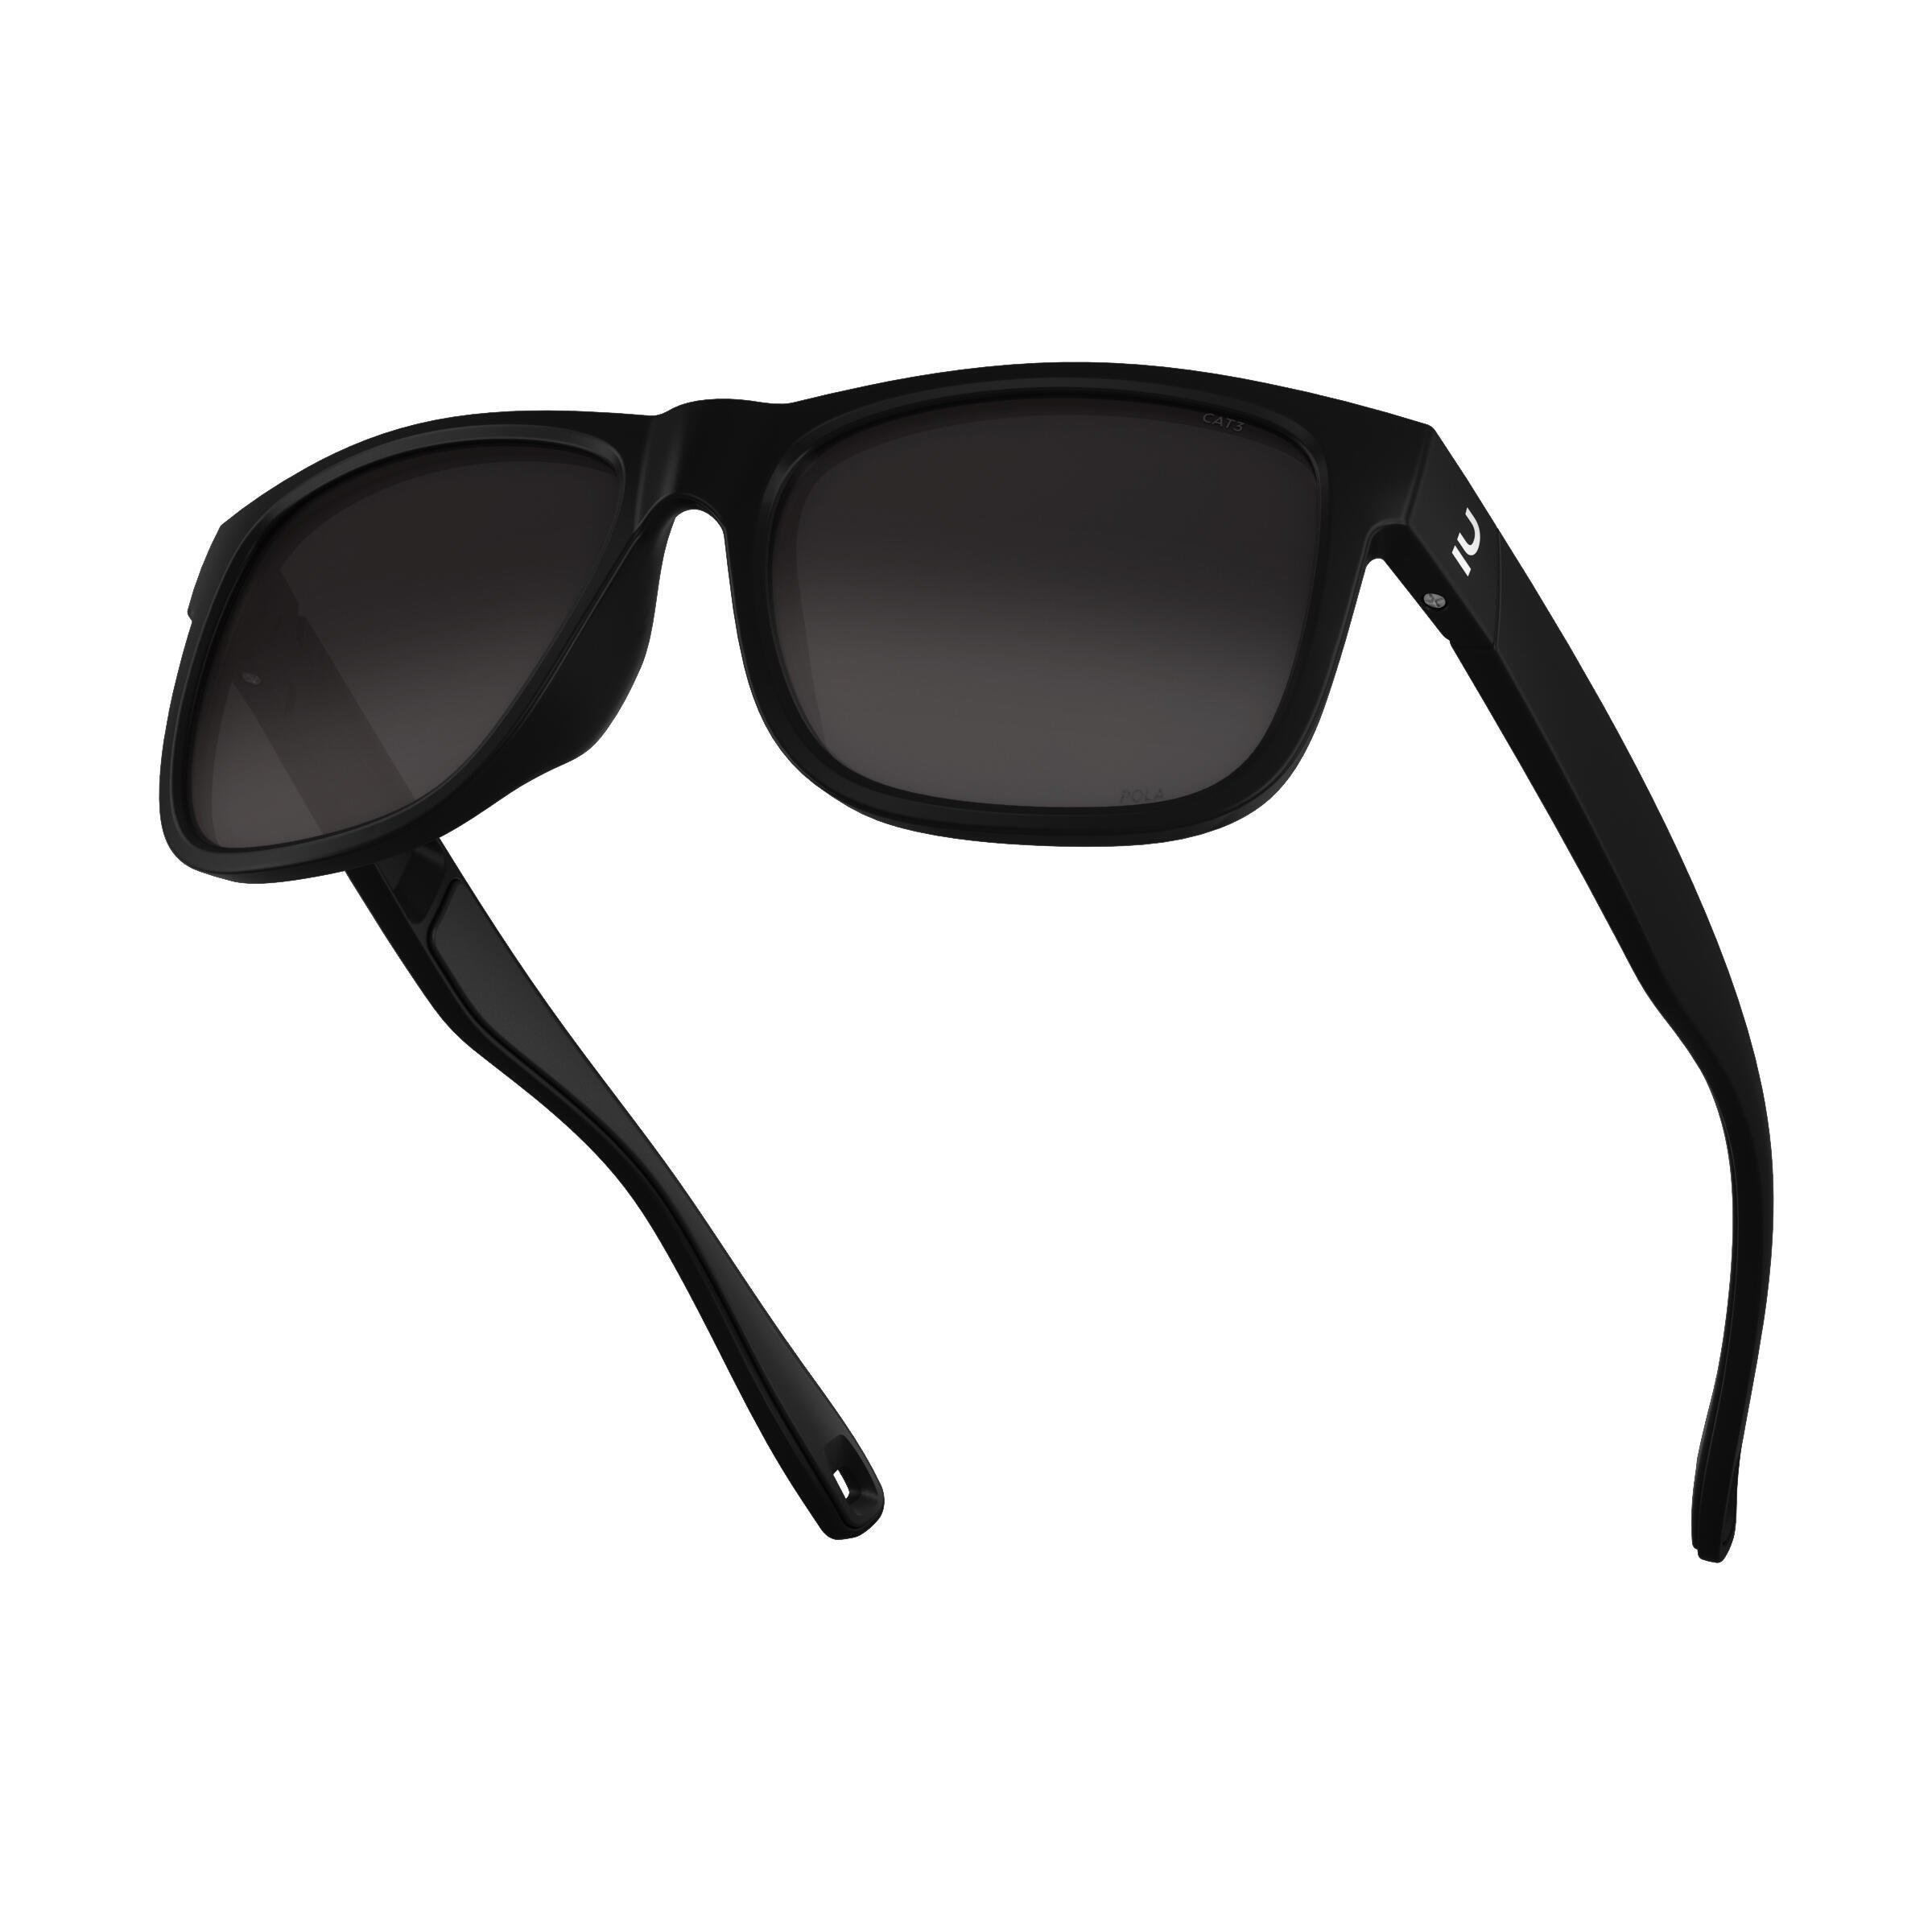 Adults Category 3 Hiking Sunglasses MH140 3/10